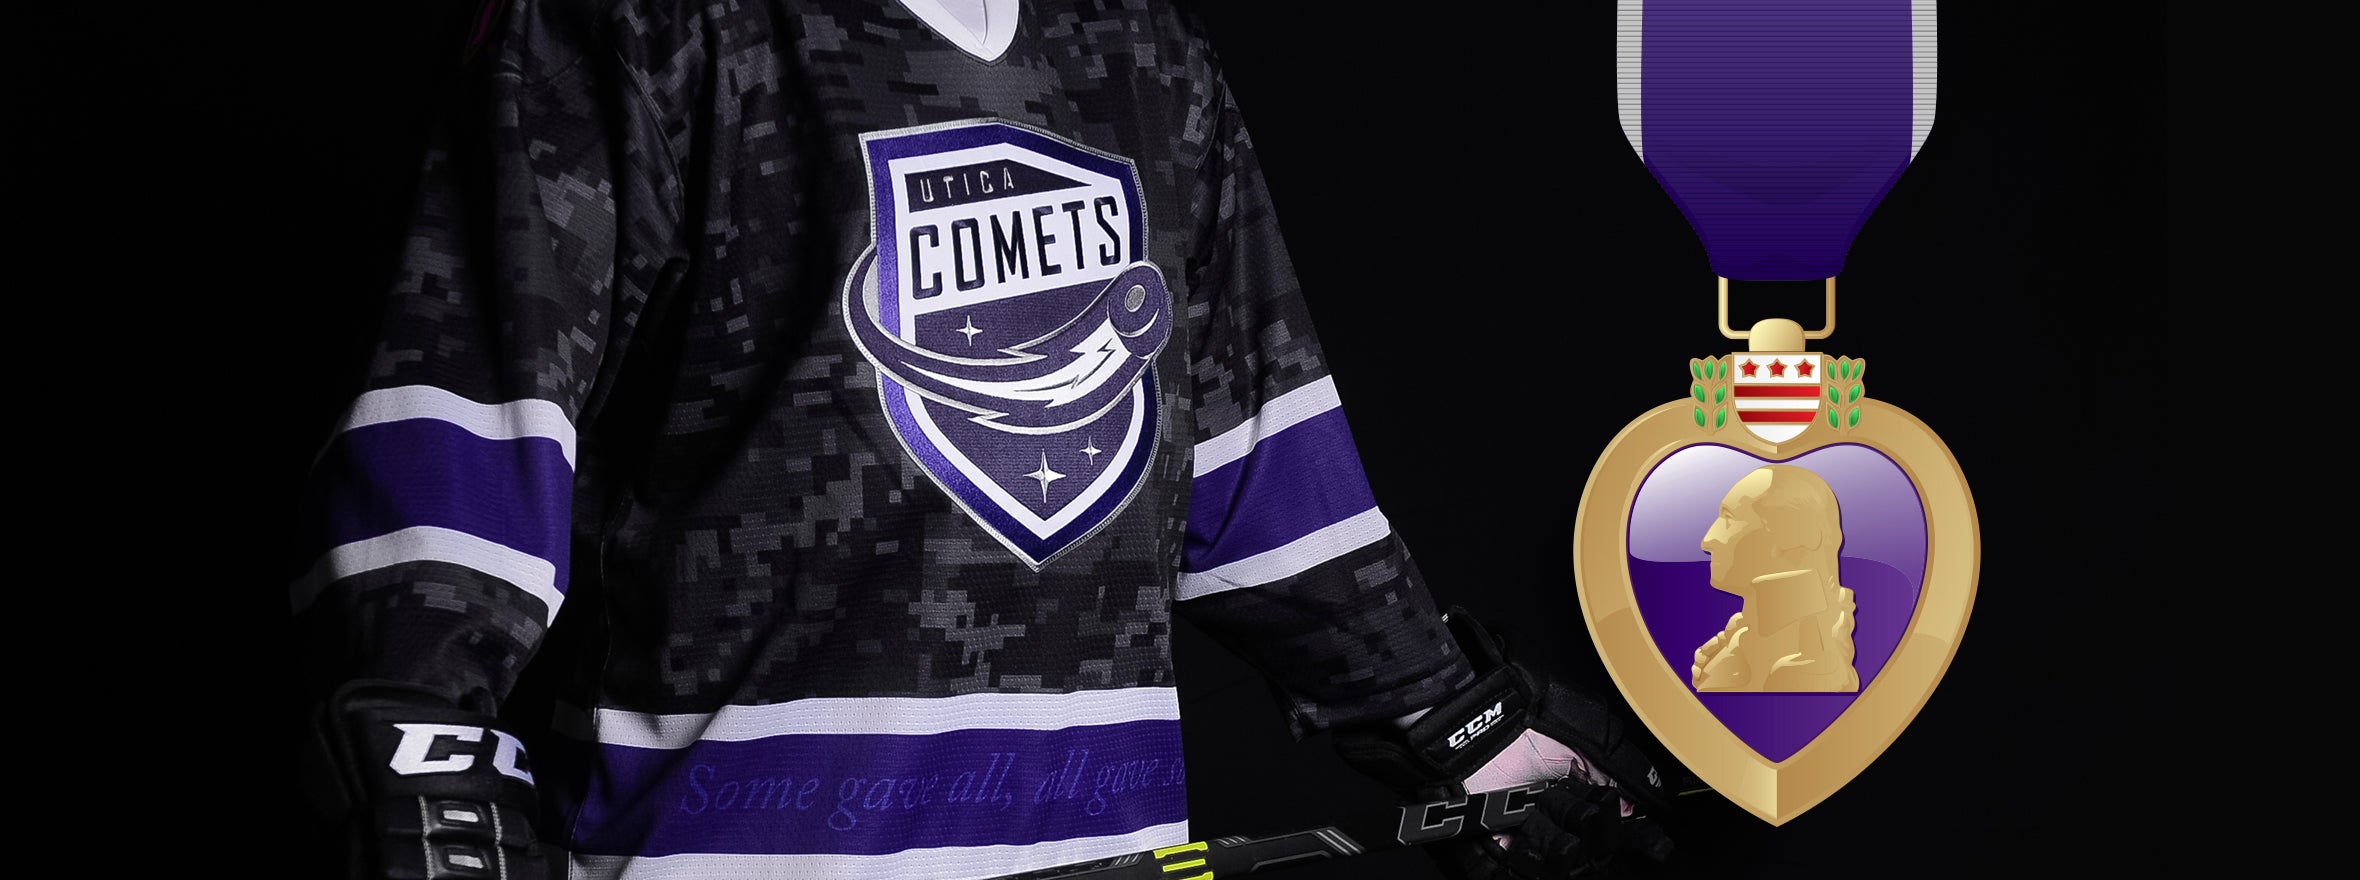 UTICA COMETS TO BE RECOGNIZED AS PURPLE HEART